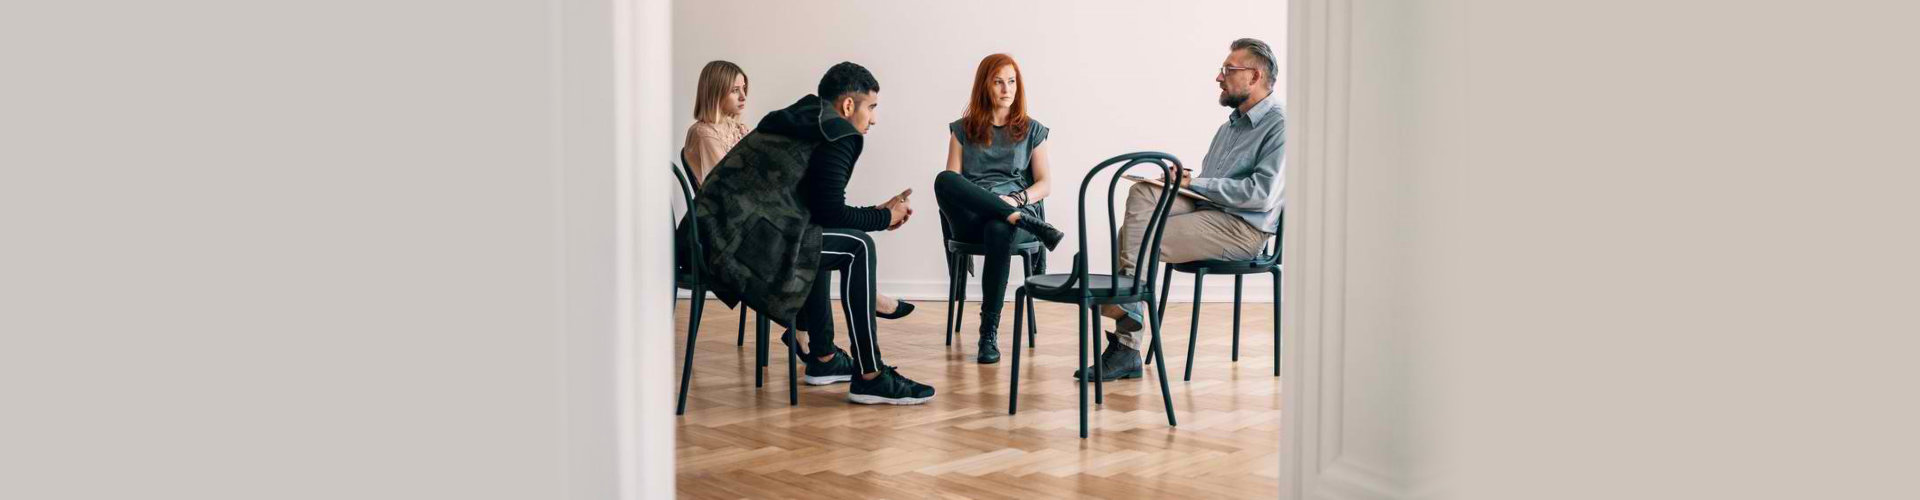 group of people sitting